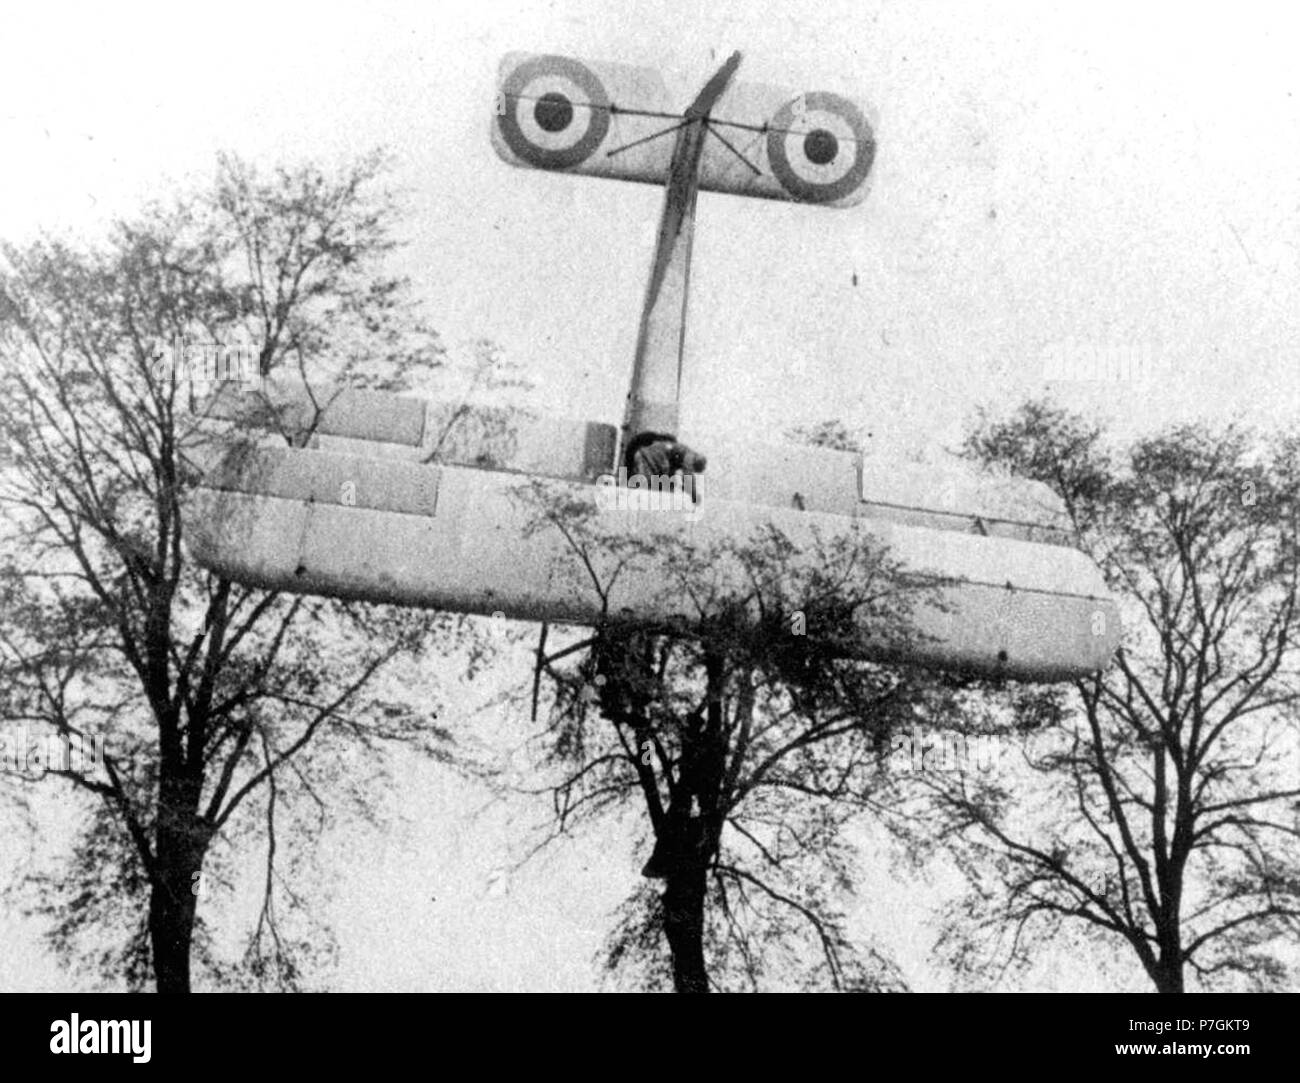 English: Botched emergency landing by a French pilot in friendly territory after a failed attempt to attack a German Zeppelin hangar in Haren, Belgium, in 1915. Soldiers are climbing up the tree where the biplane has landed. Nationaal Archief . 3 May 2014 275 Mislukte noodlanding, 1915 Stock Photo